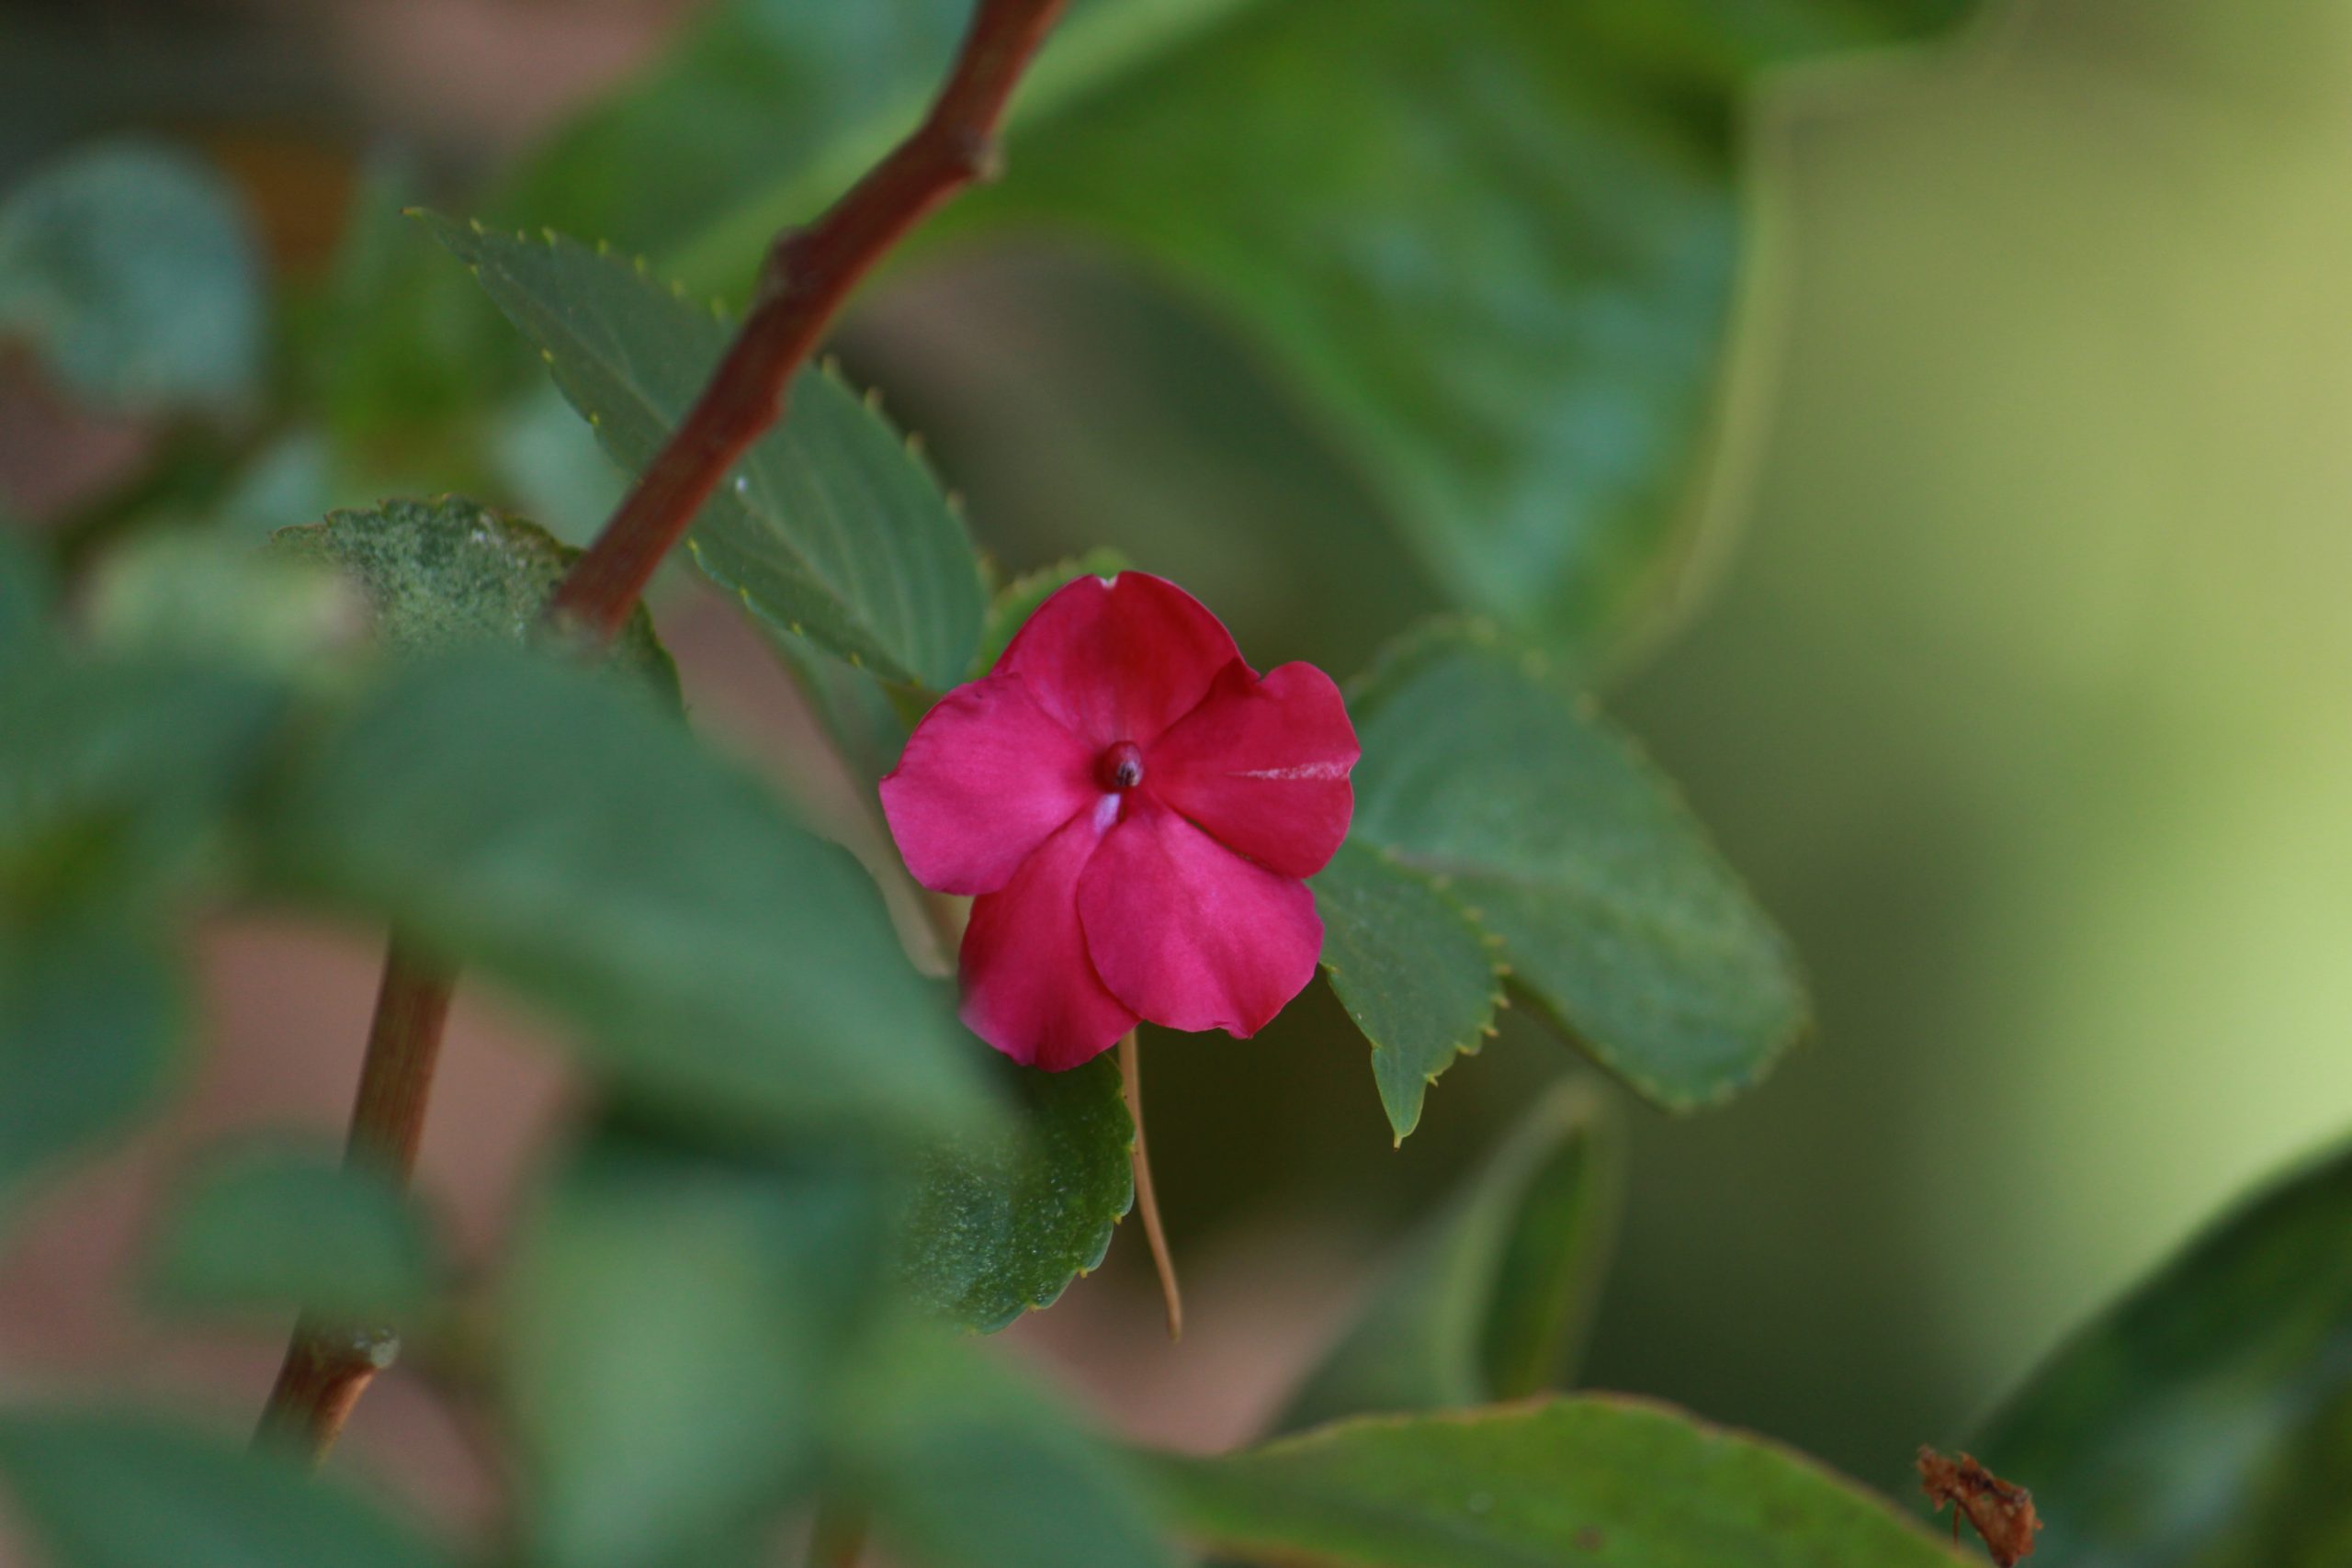 A red flower on a plant